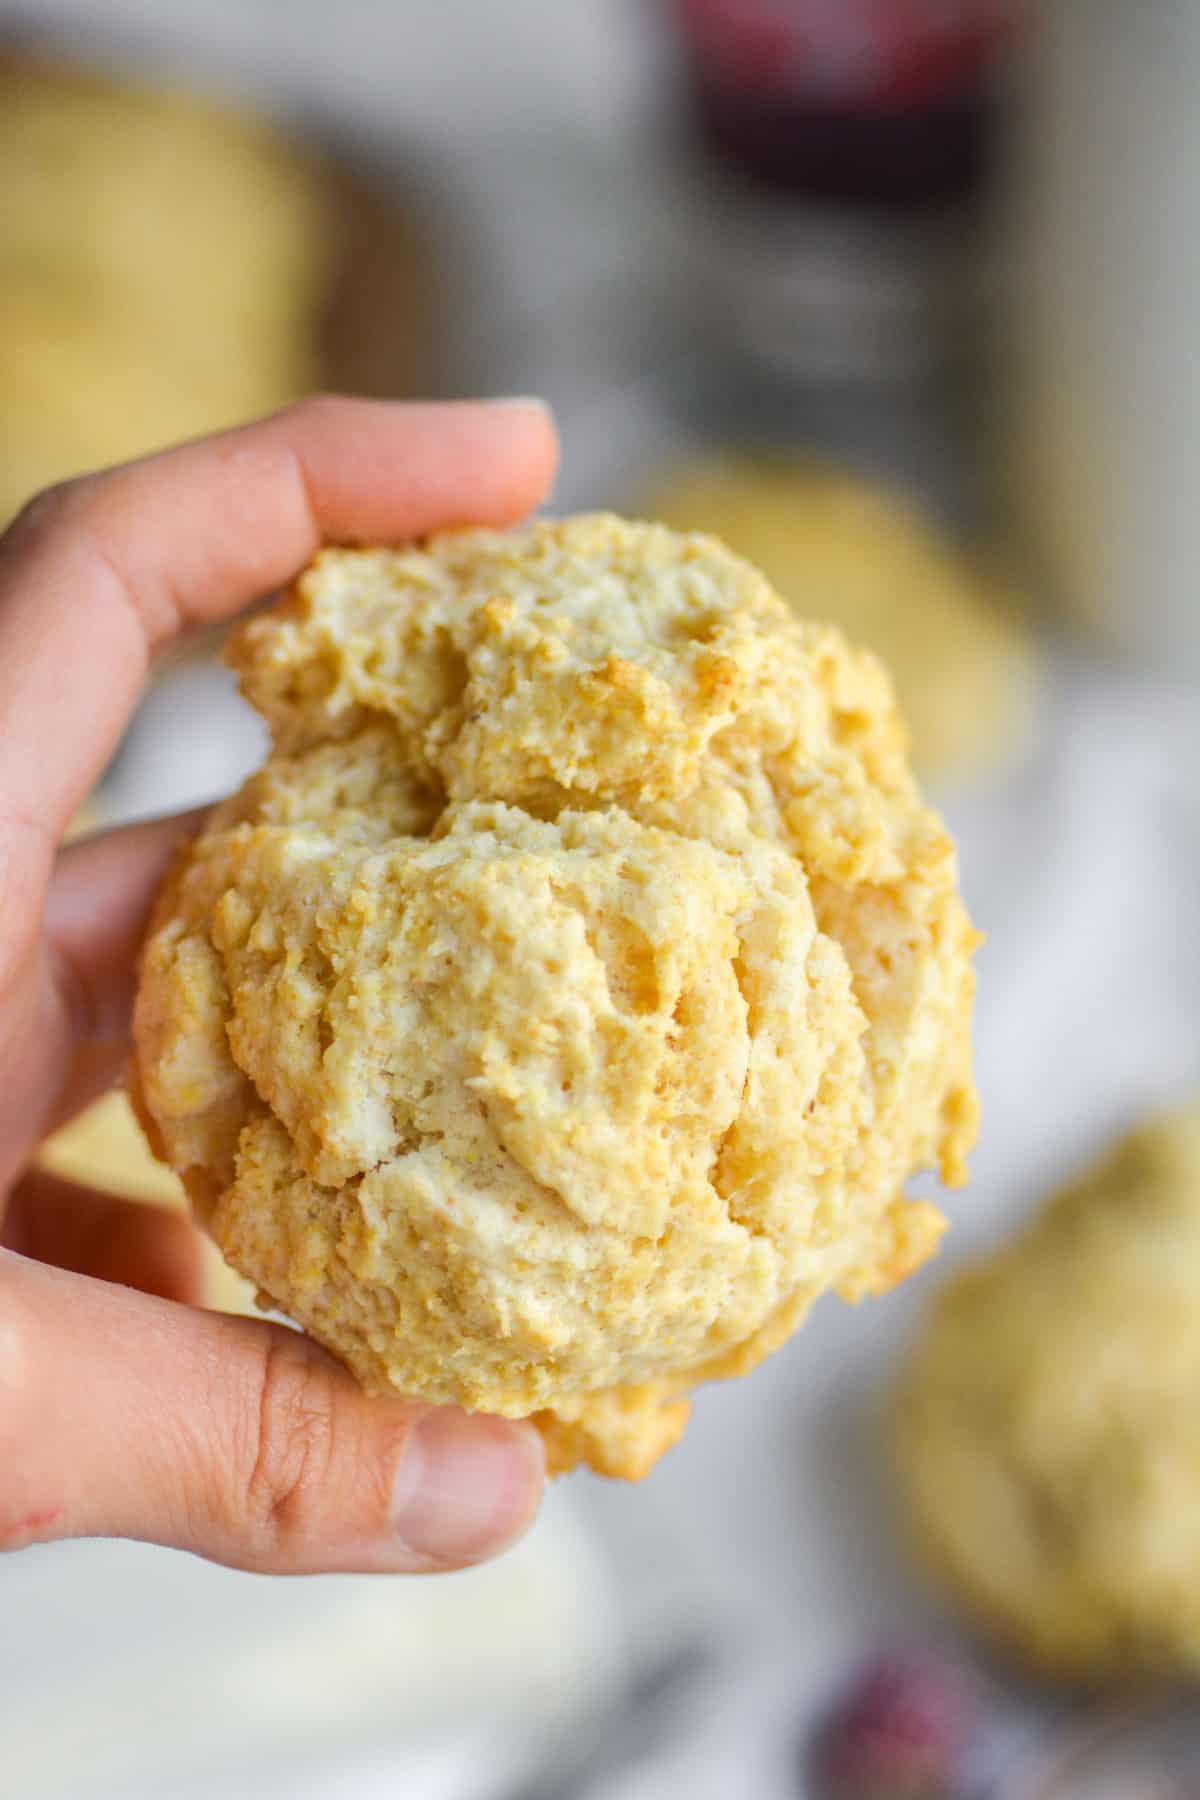 Hand holding a Fluffy Vegan cornmeal drop biscuit